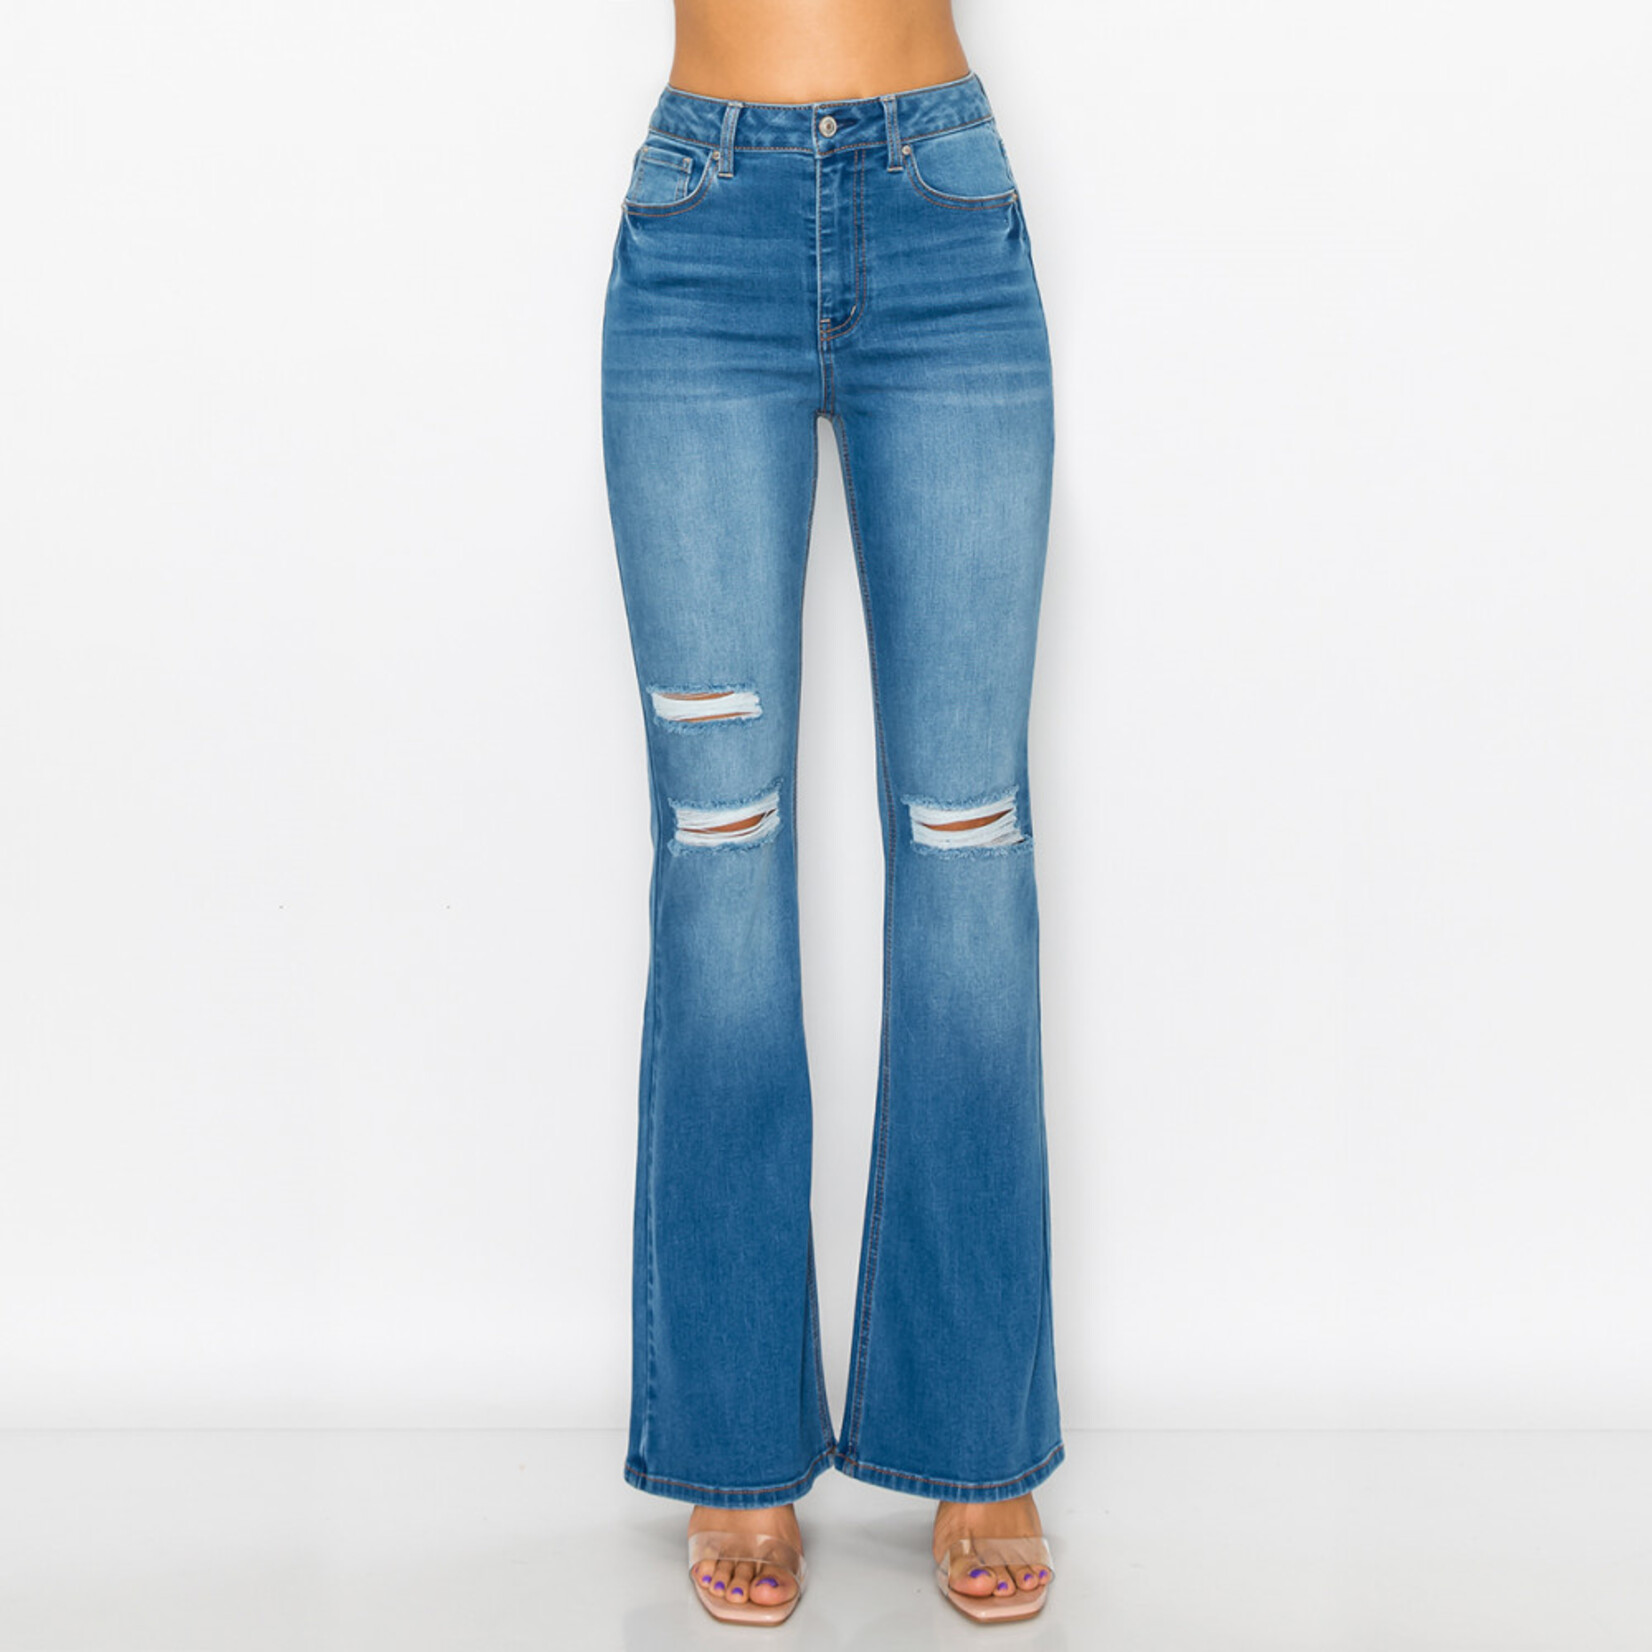 Wax Jeans WAX JEANS FLARE STYLE 90261